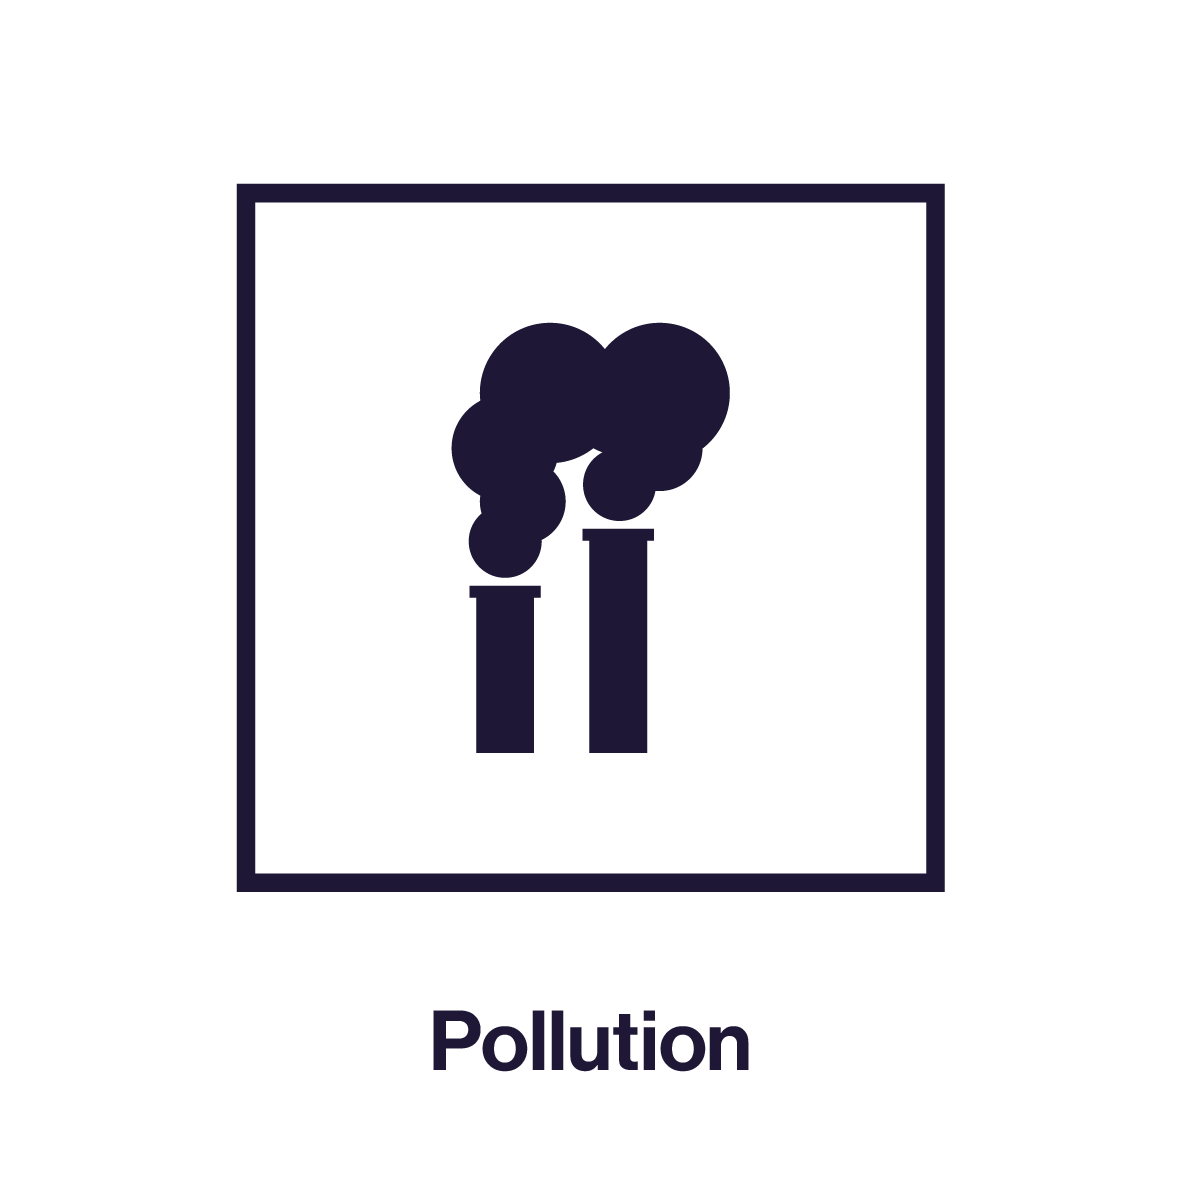 BREEAM assessment category, Pollution icon